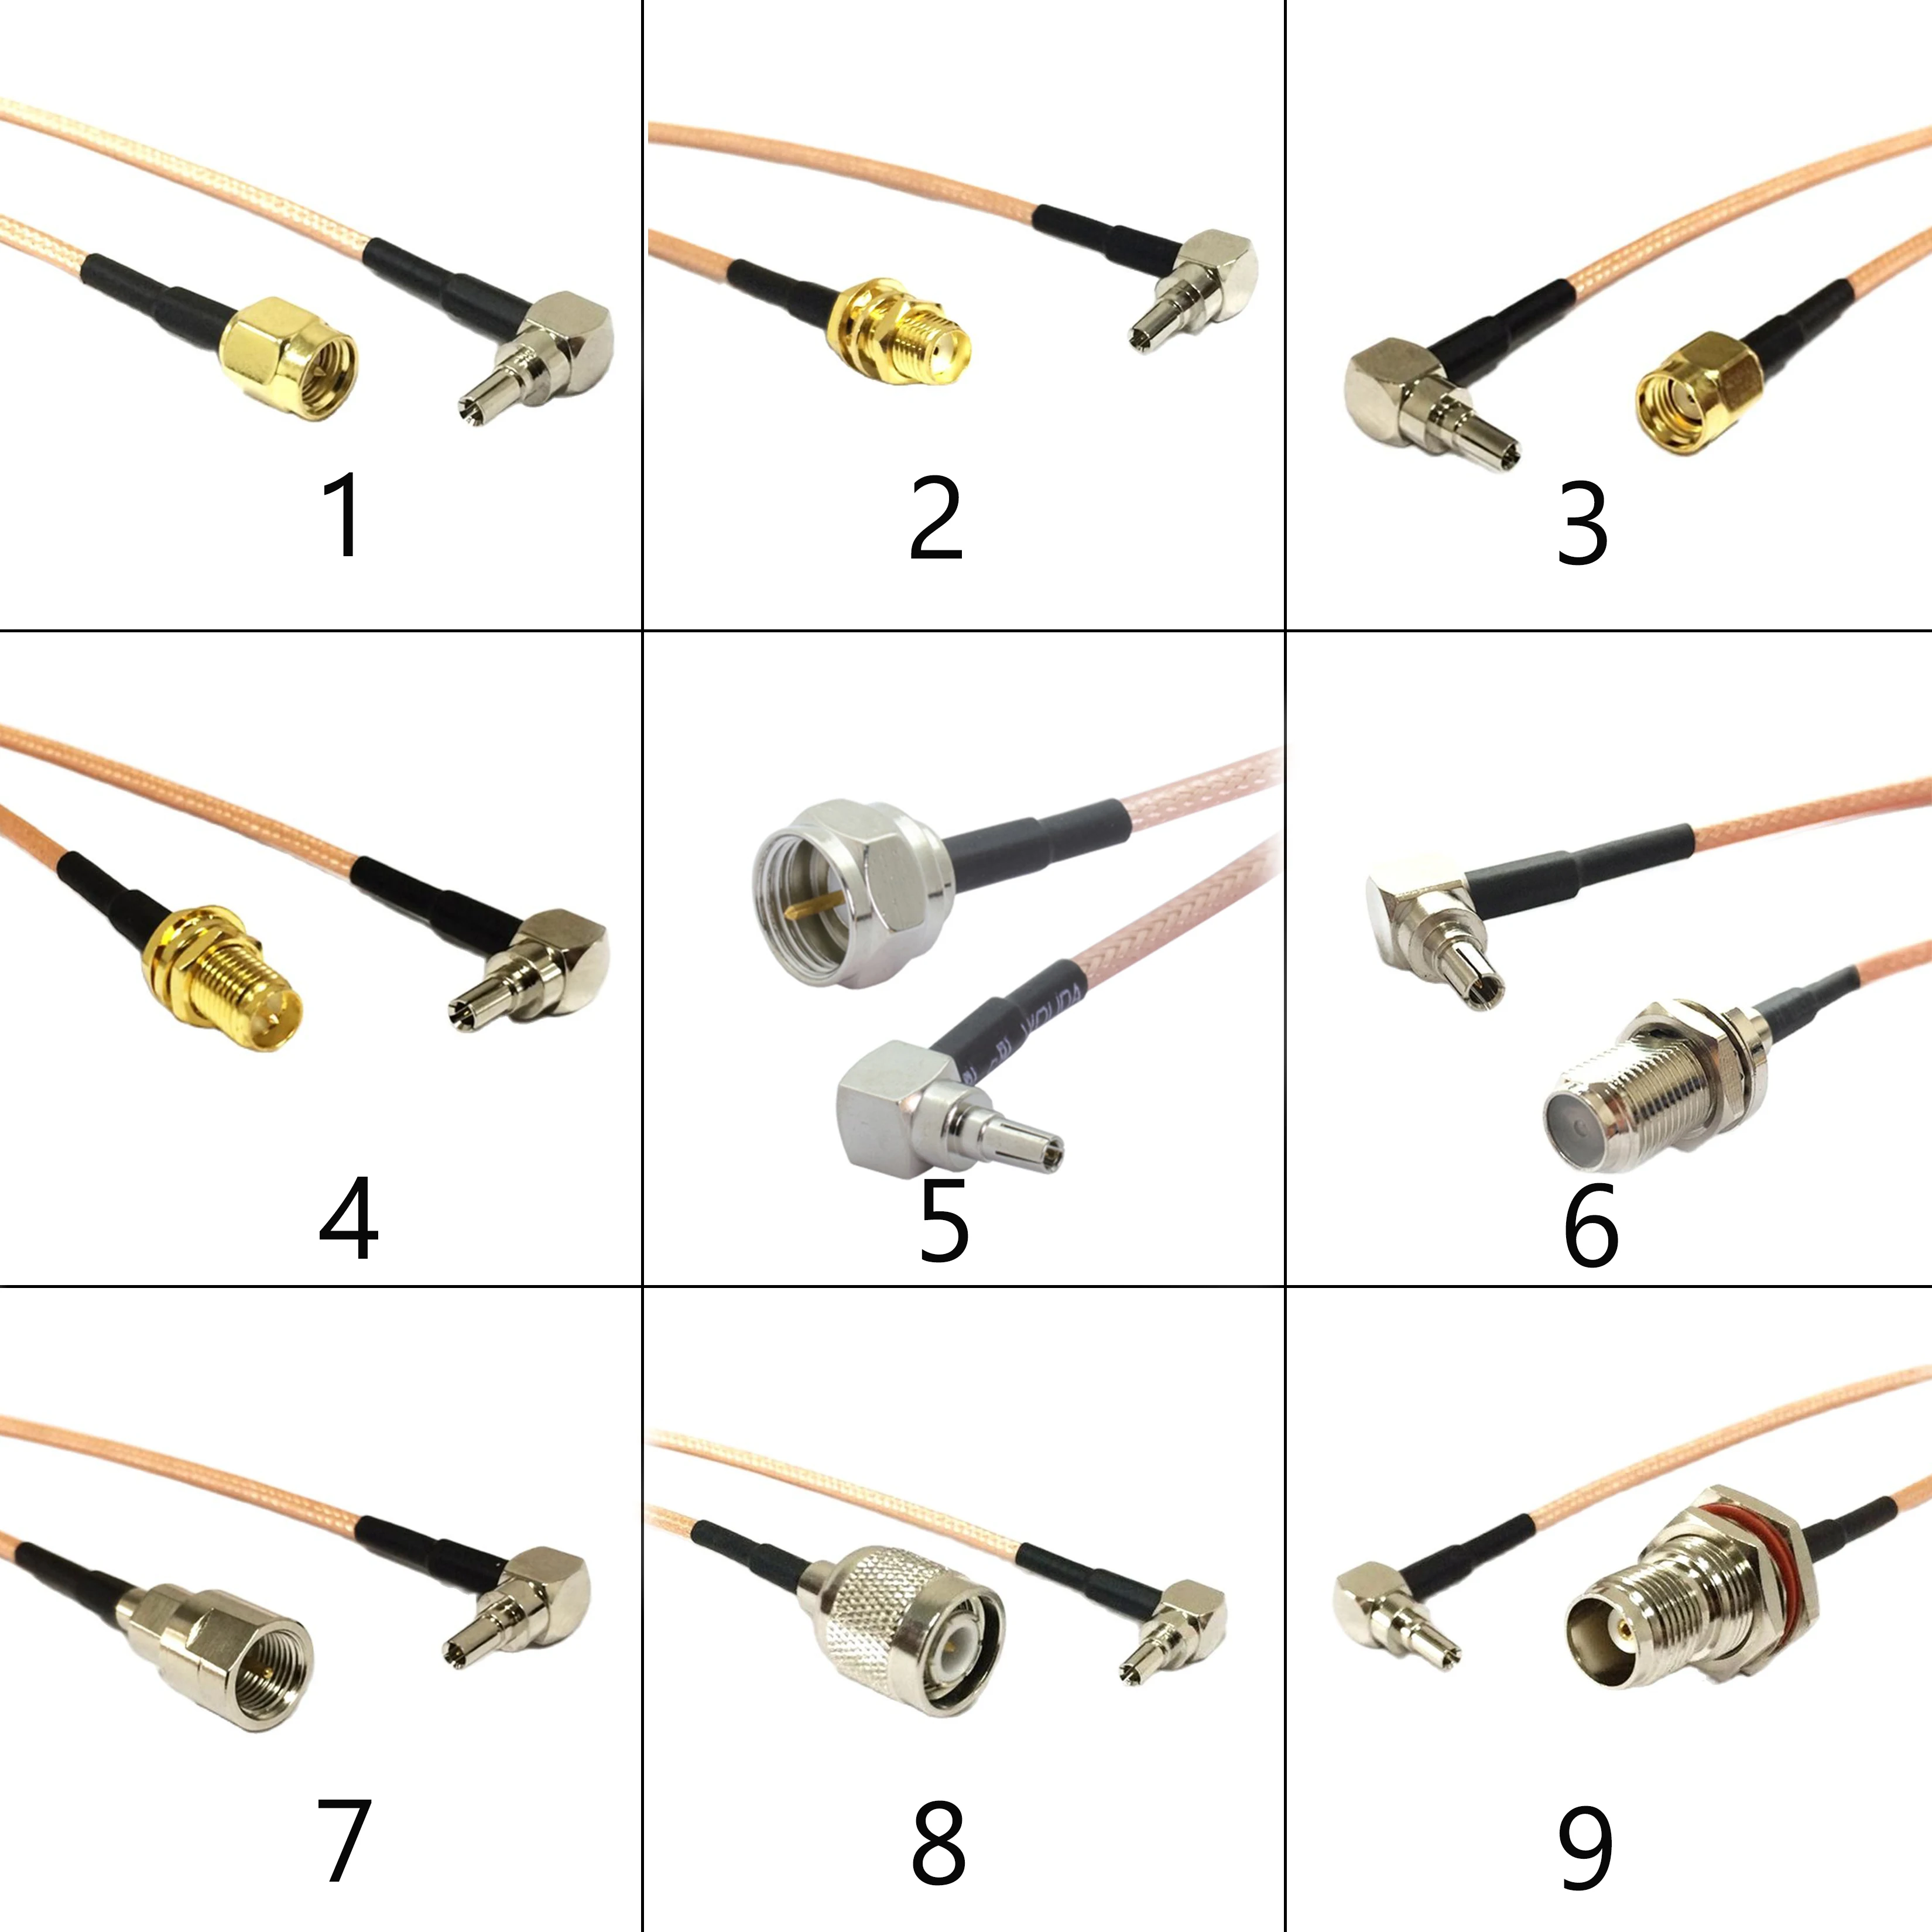 3G USB Modem Cable CRC9 Right Angle Switch SMA/ FME/F /TNC Male Female Pigtail Adapter RG316 Wire Connector New Wholesale